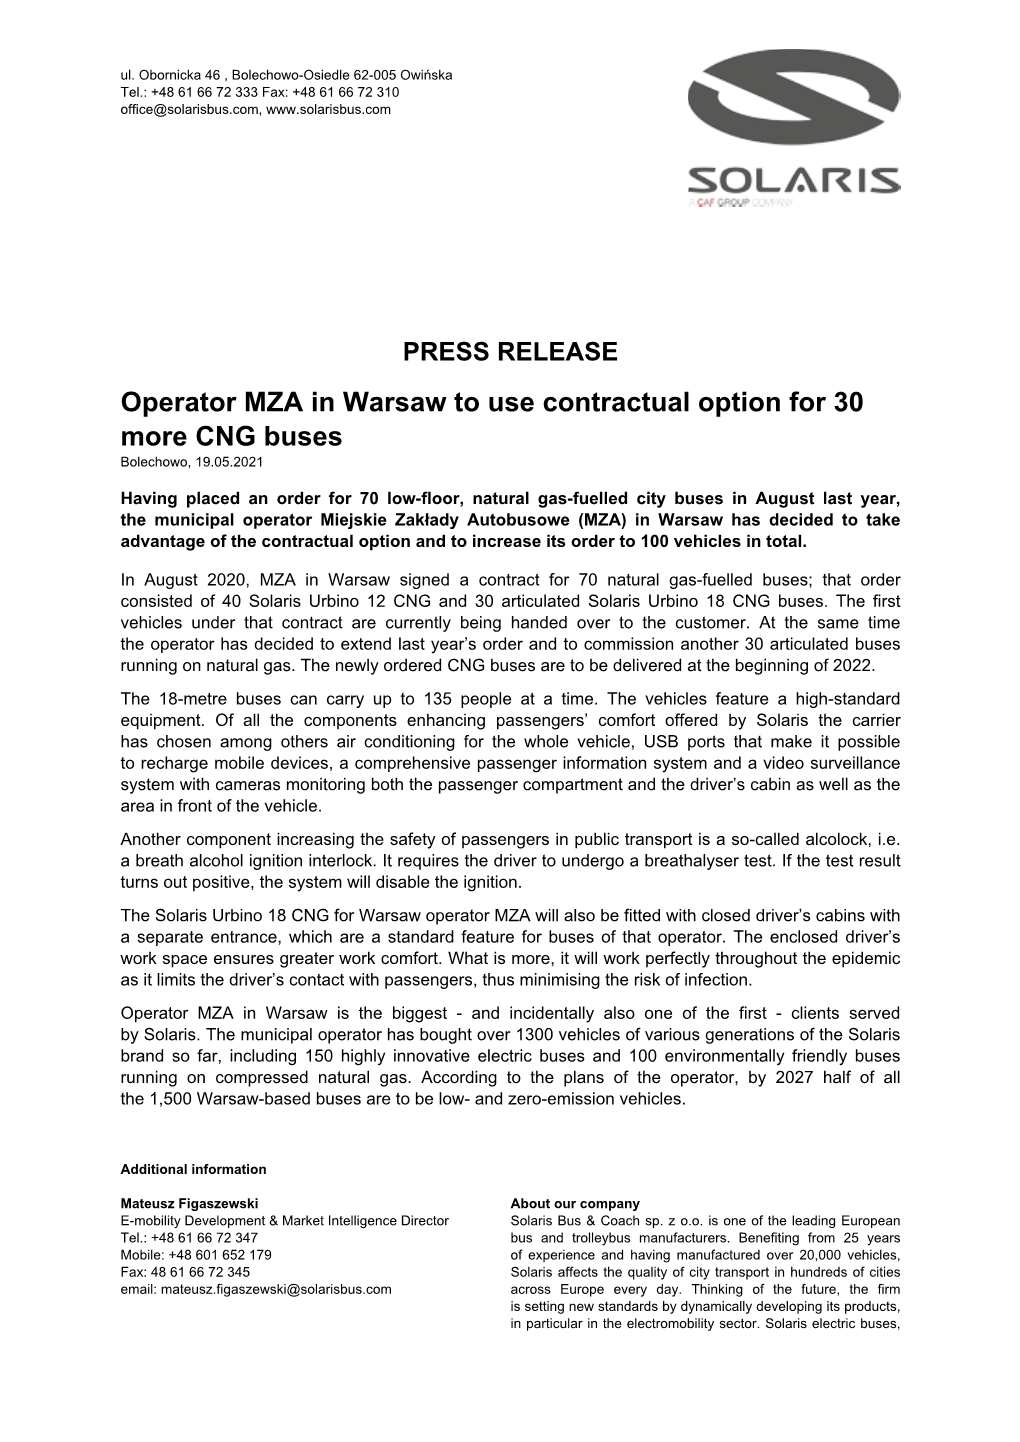 PRESS RELEASE Operator MZA in Warsaw to Use Contractual Option